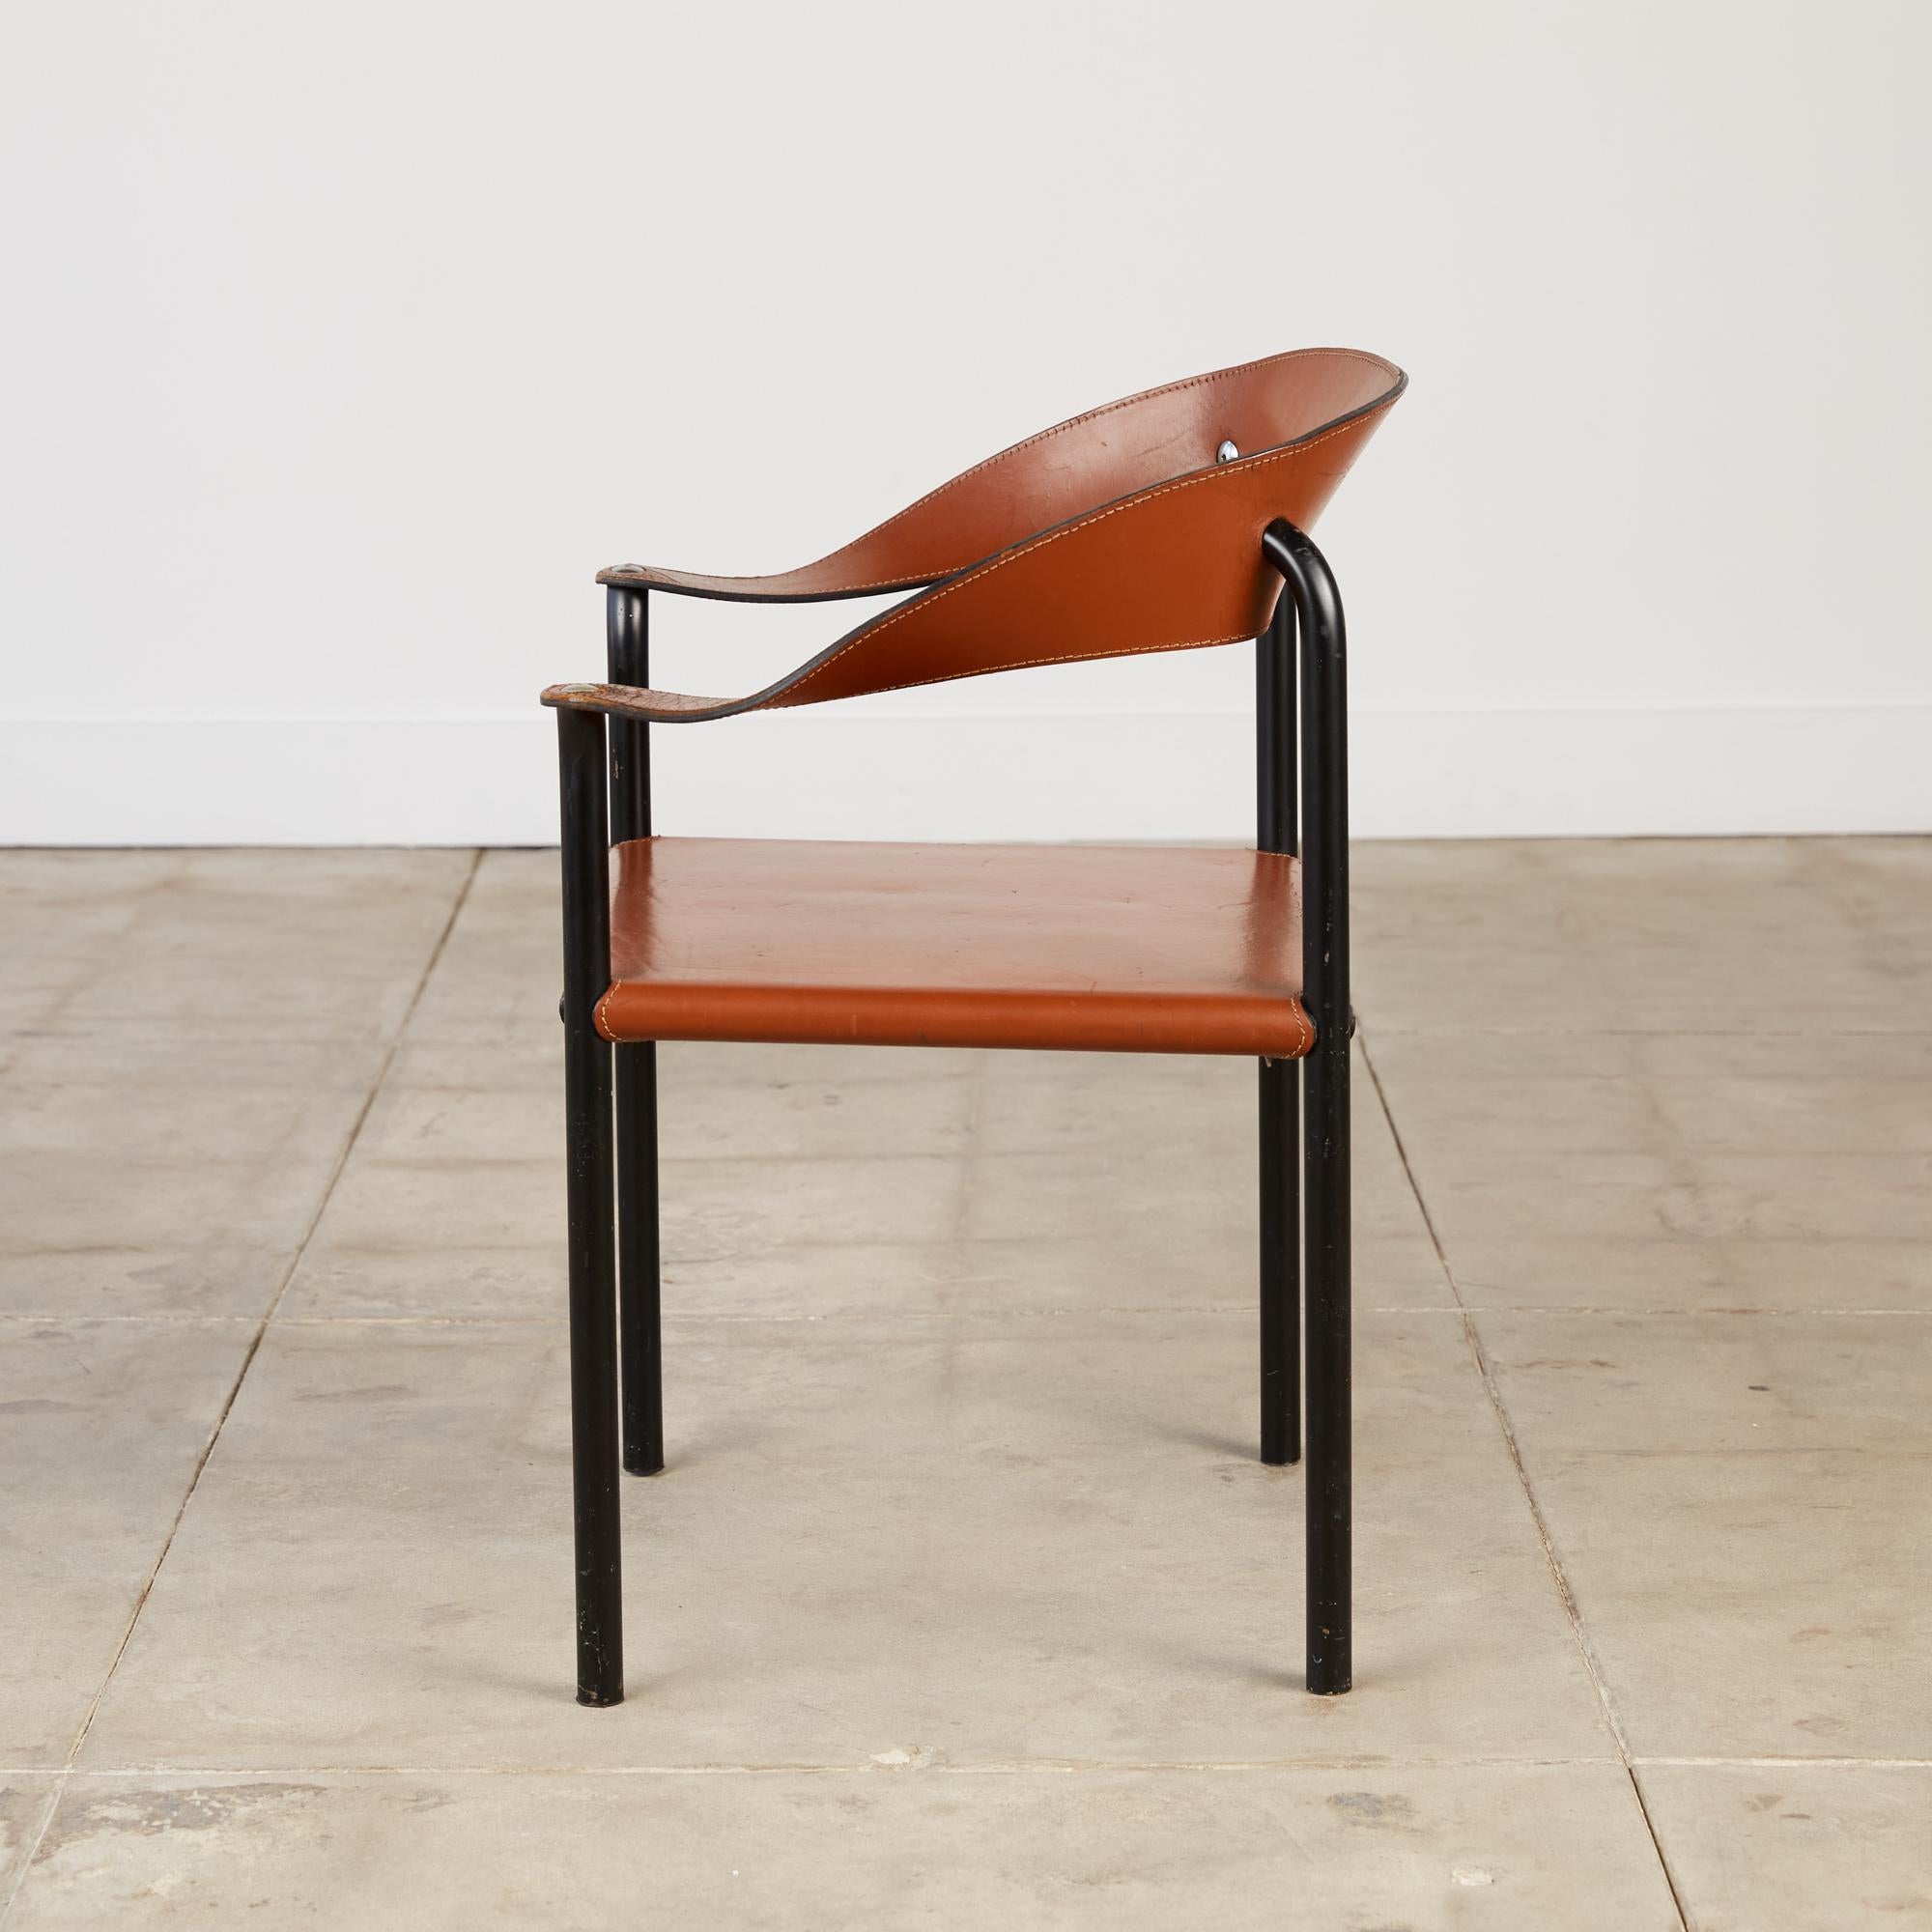 Armchair by Stendig, Finland, c.1950s. The chair features the original hand-stitched brown leather accented with metal hardware. The base is powder-coated in black and delicately carries a strap of leather that forms as the arms and backrest